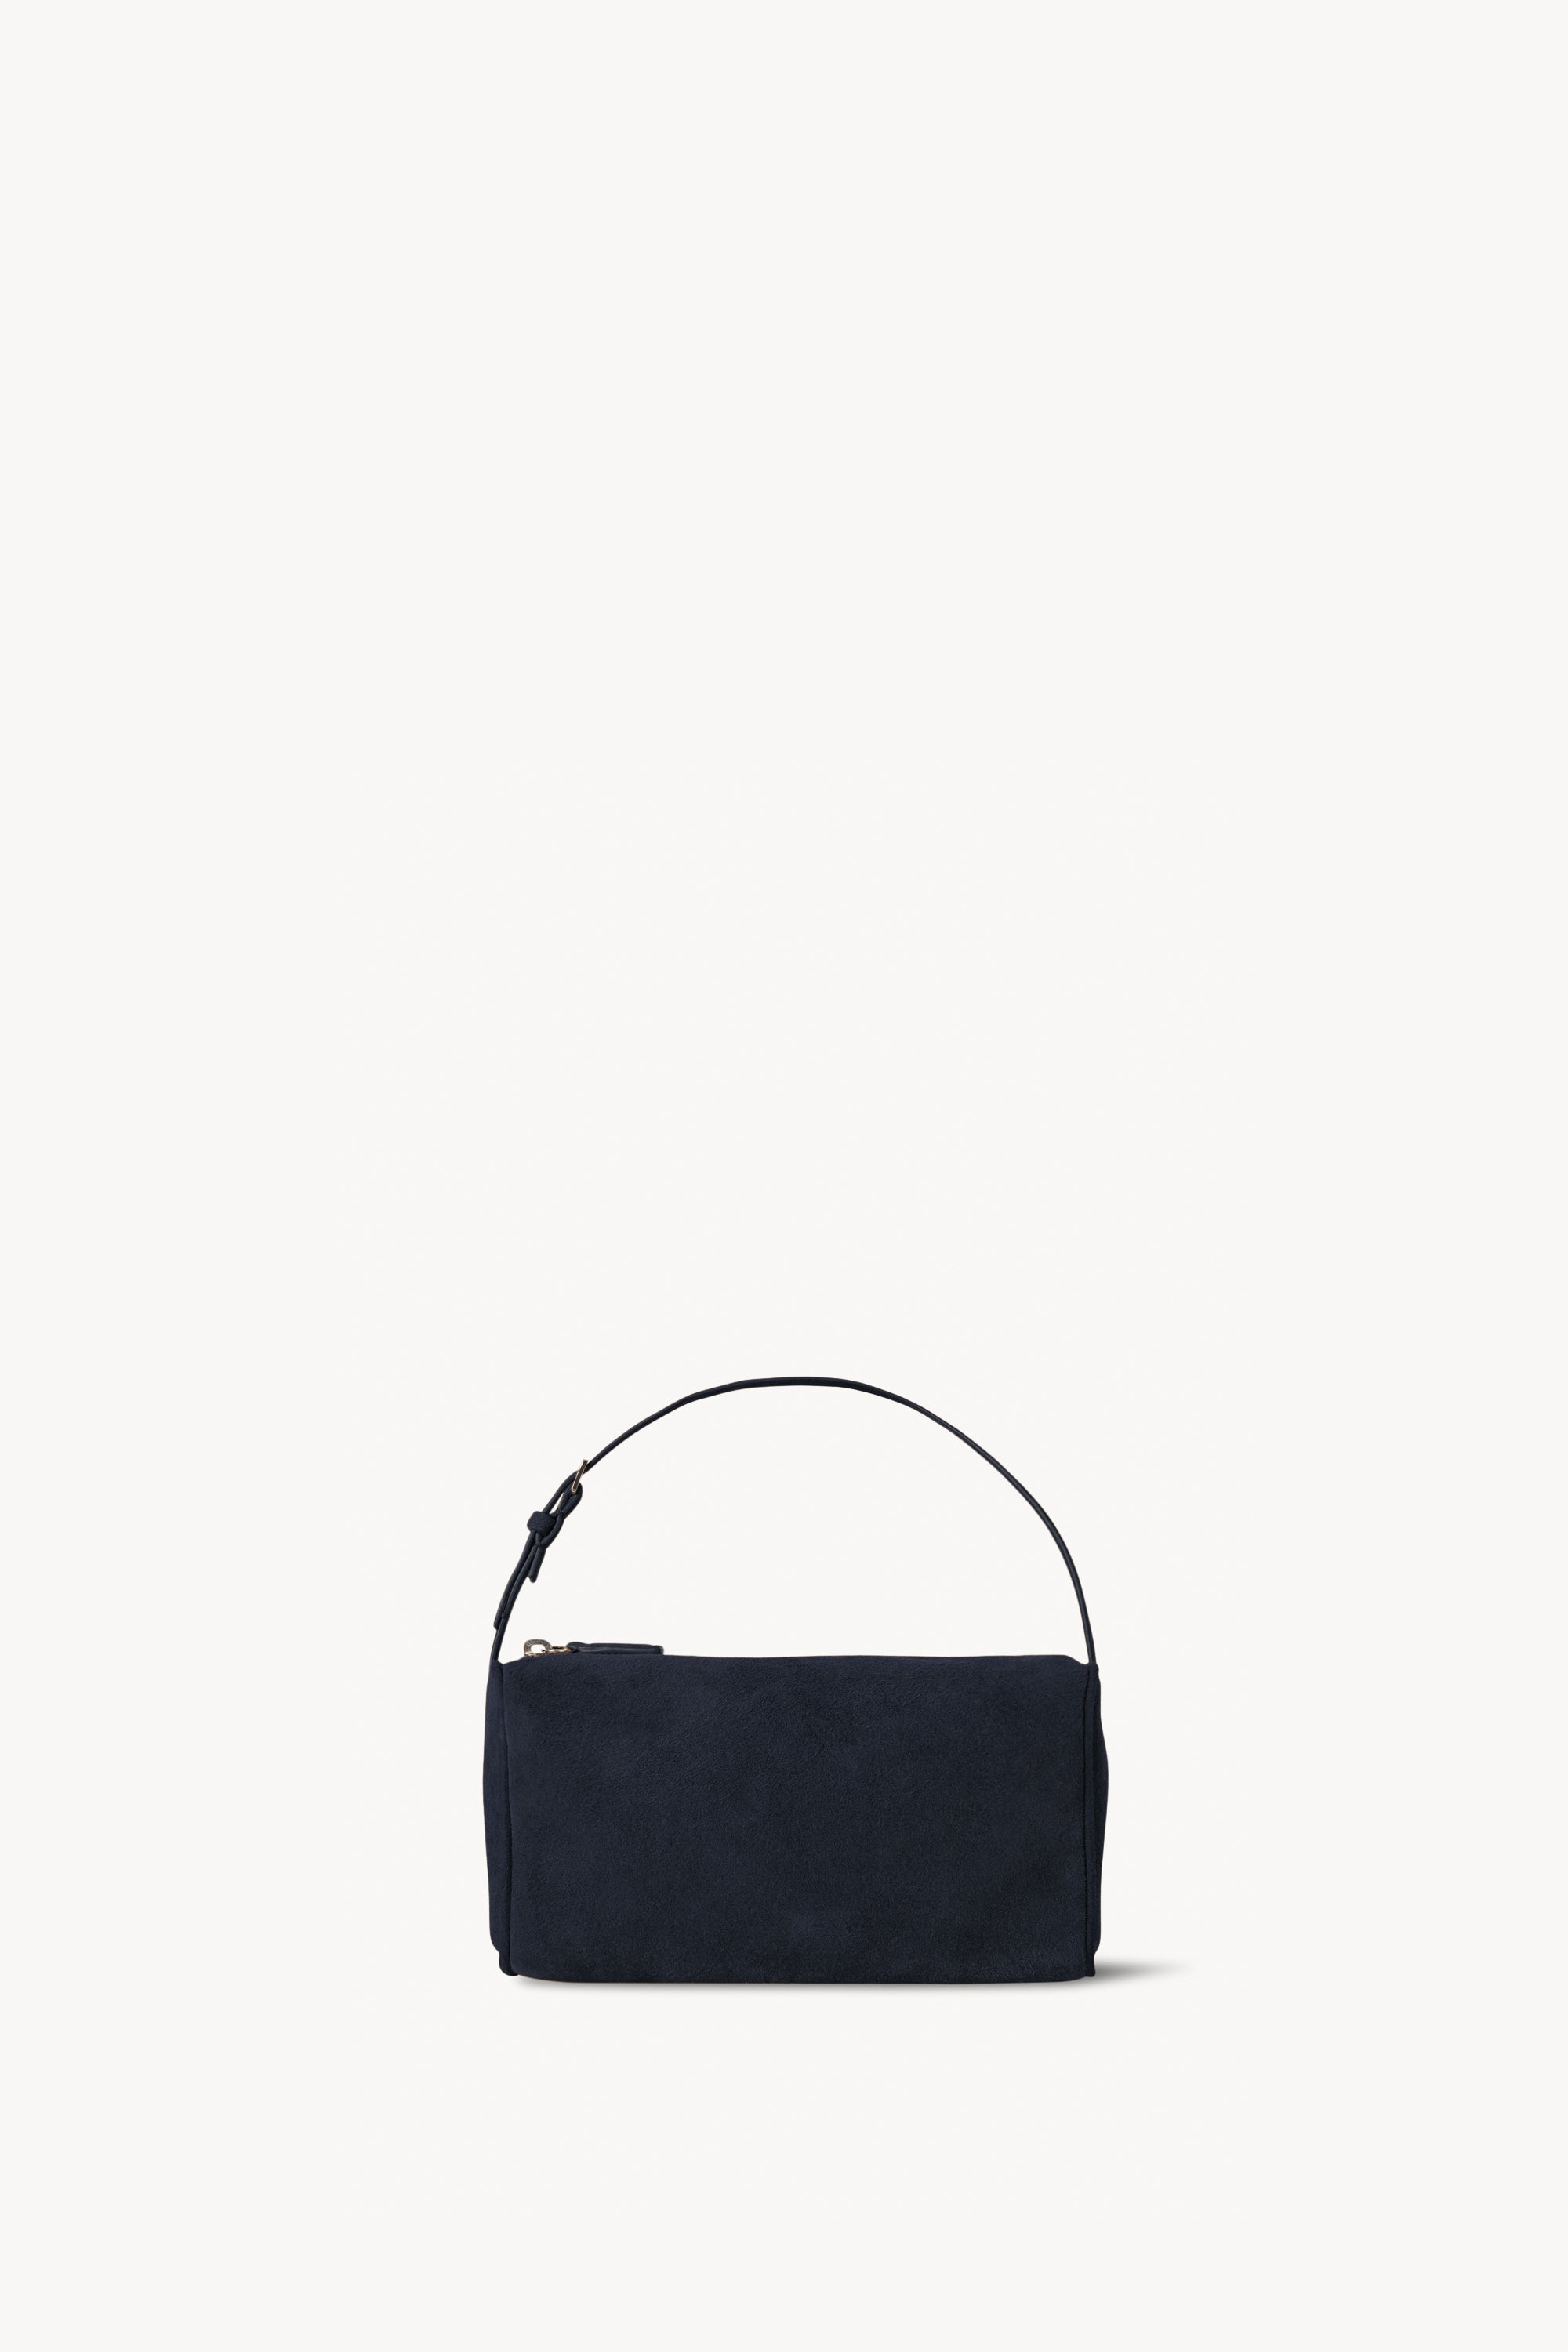 therow 90s small suede tote ネイビー